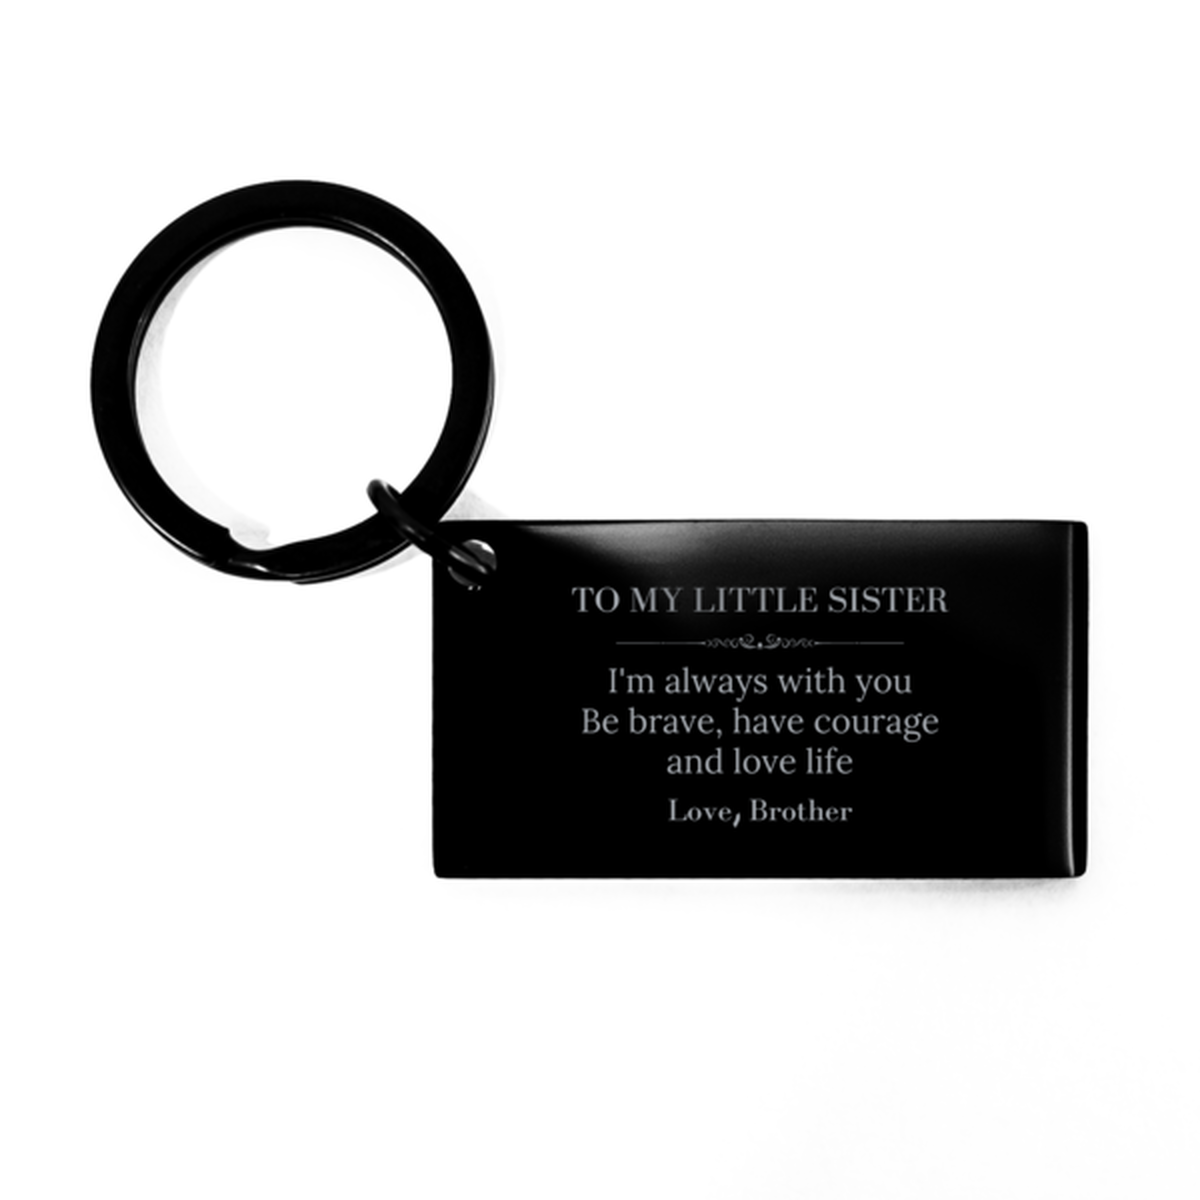 To My Little Sister Gifts from Brother, Unique Keychain Inspirational Christmas Birthday Graduation Gifts for Little Sister I'm always with you. Be brave, have courage and love life. Love, Brother